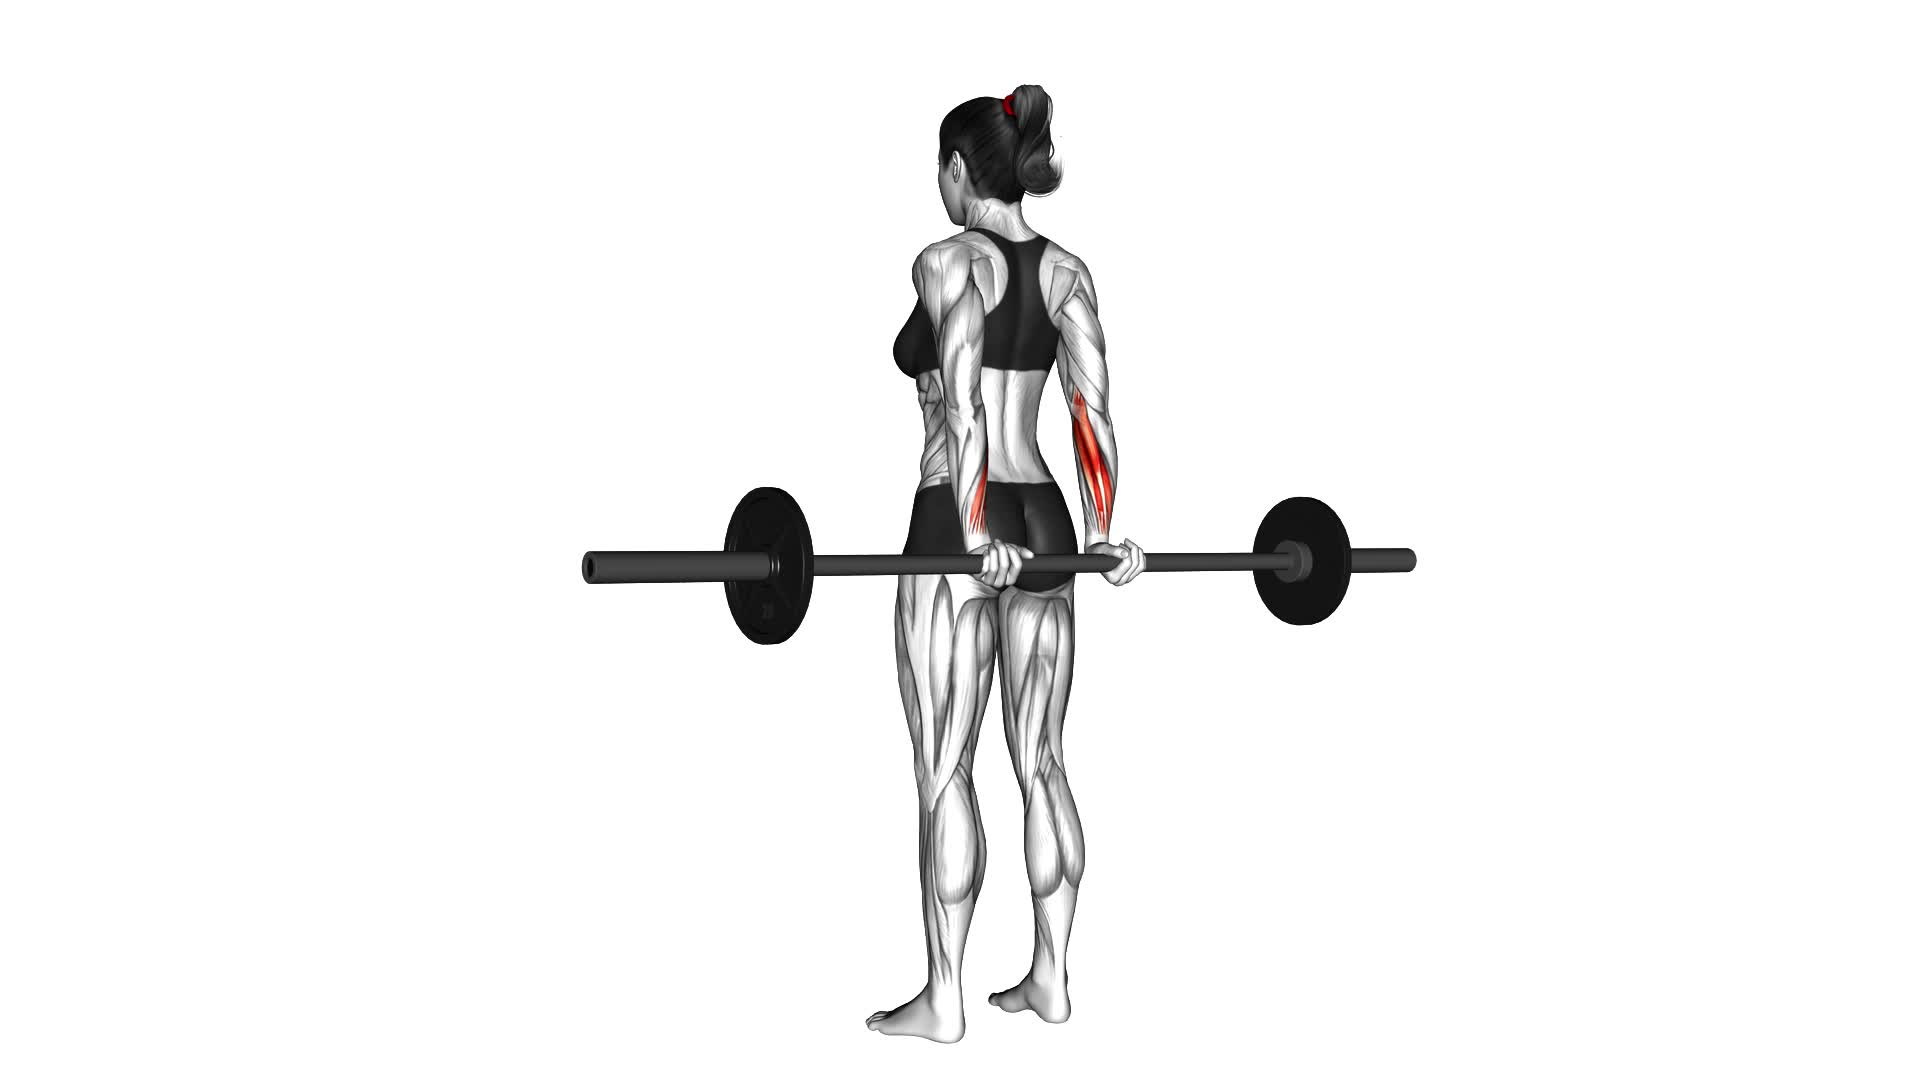 Barbell Standing Back Wrist Curl (female) - Video Exercise Guide & Tips